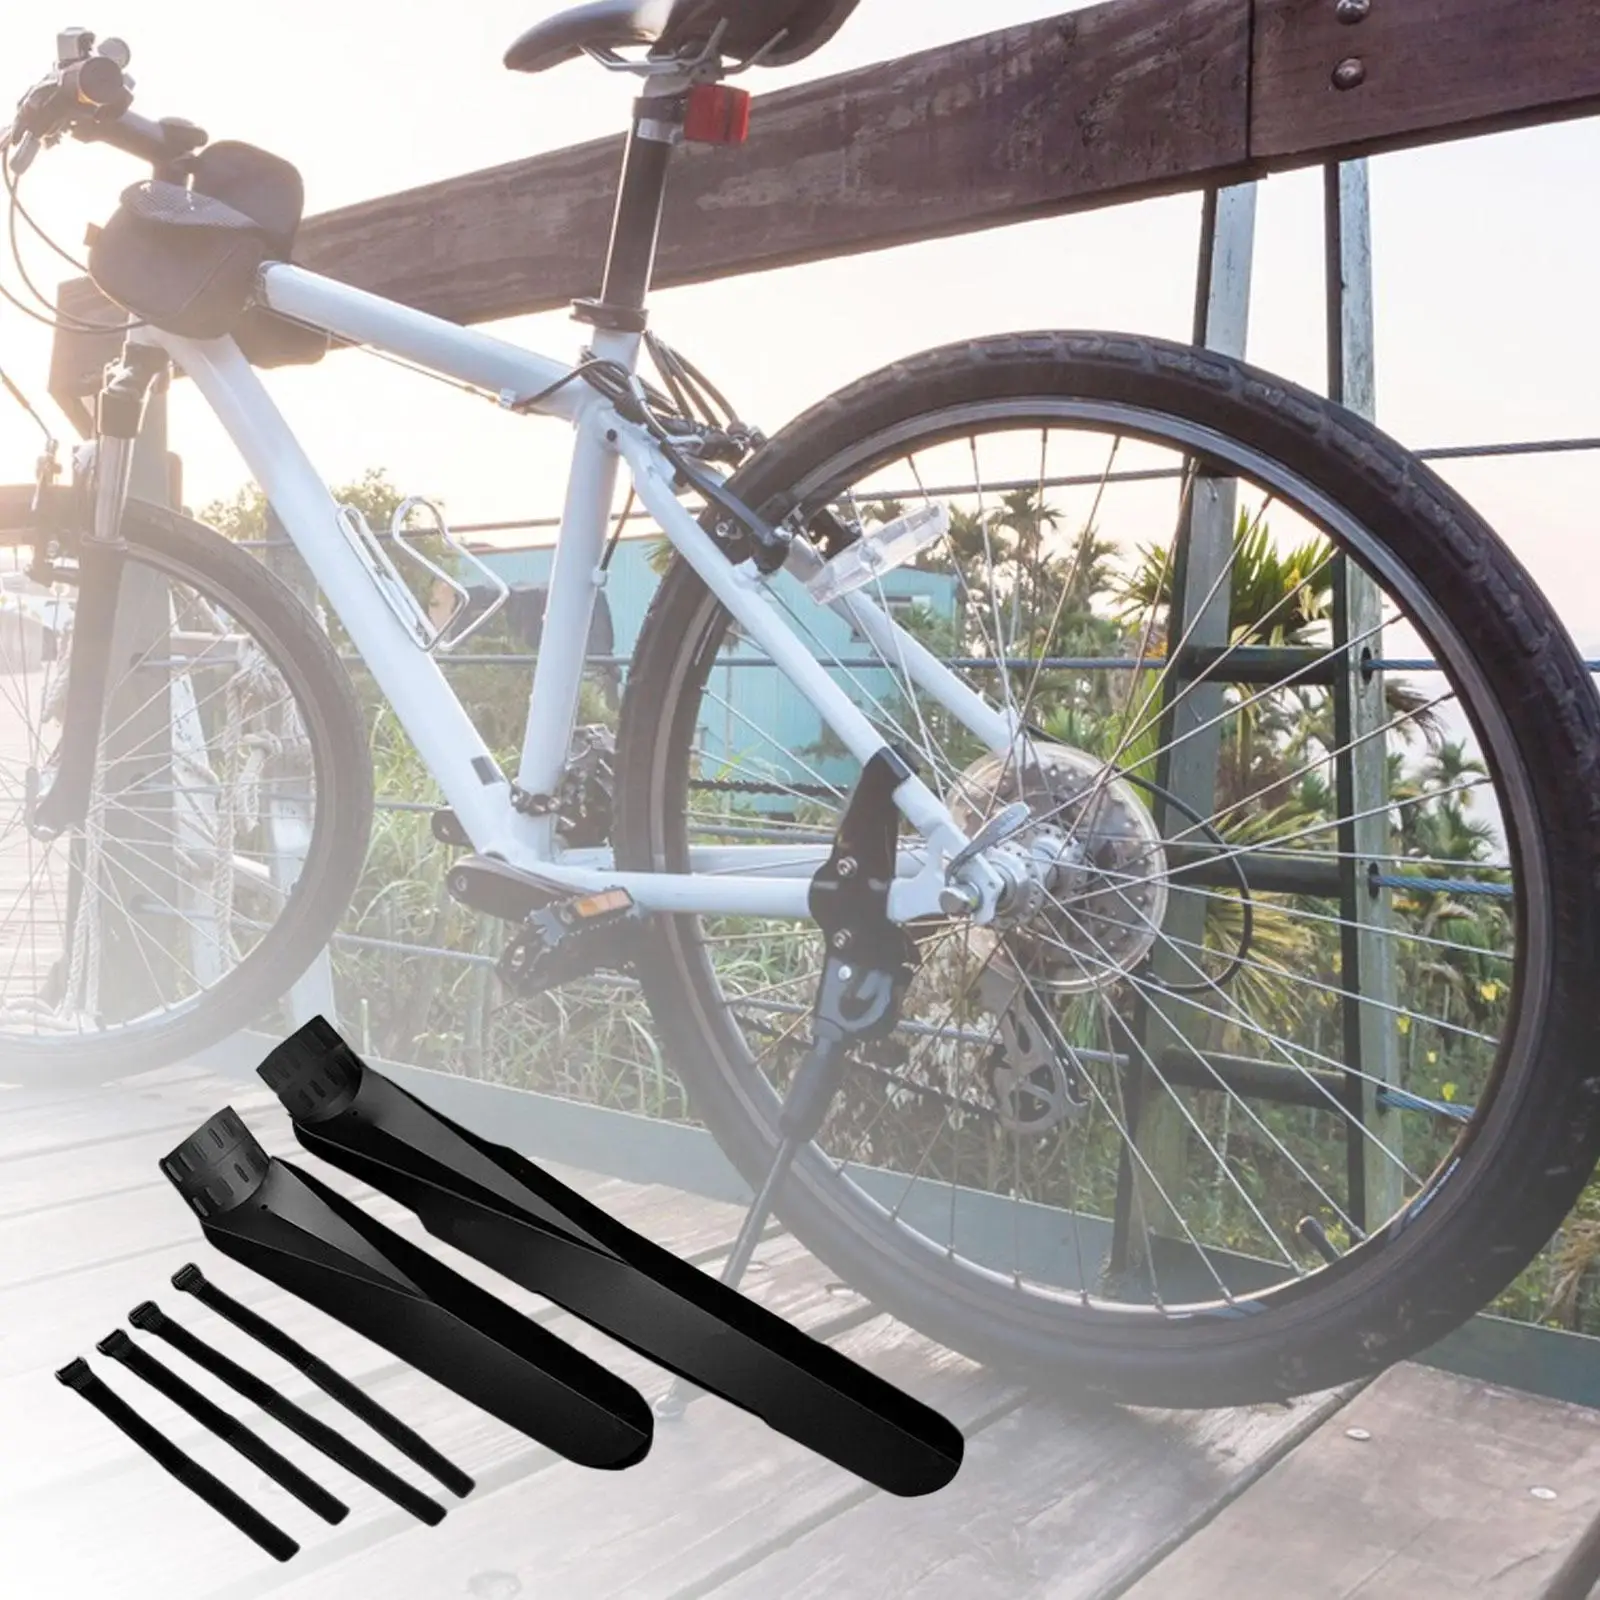 Front Rear Set Foldable Fittings Adjustable Parts Portable Durable Bike Mudguard Mudflap for Road Bike Riding Traveling Outdoor